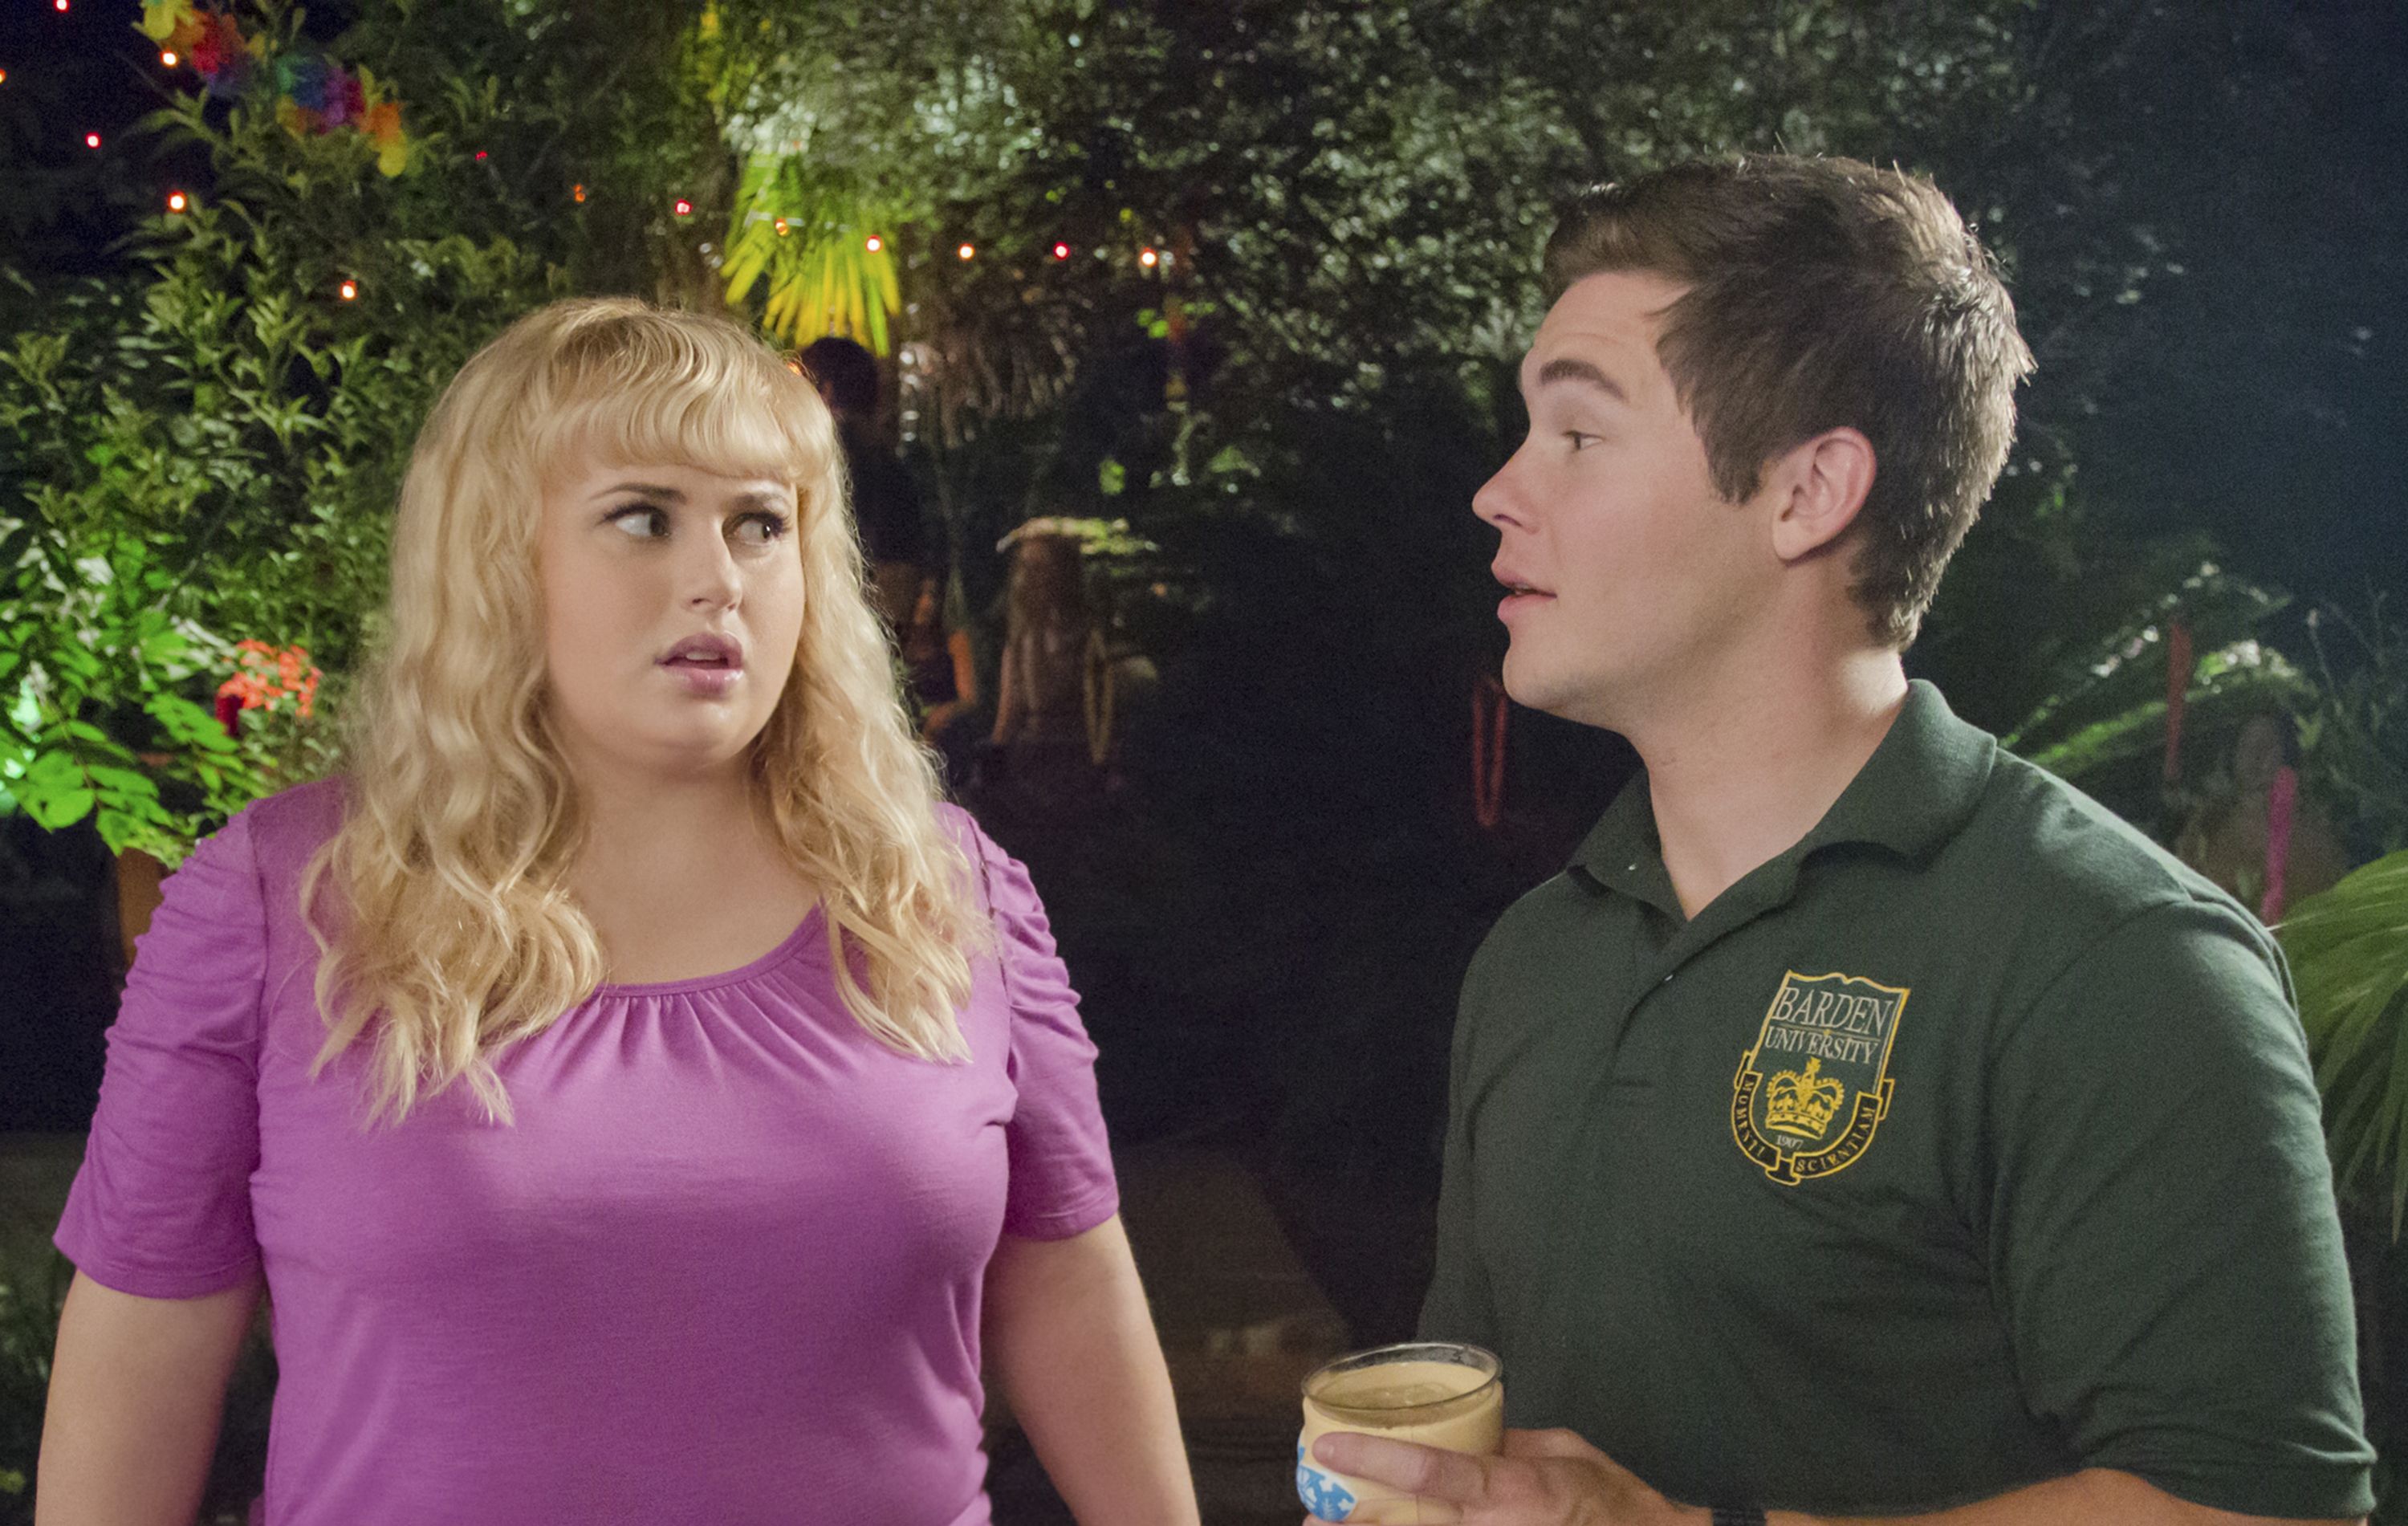 Pitch Perfect TV show has future revealed after season 1